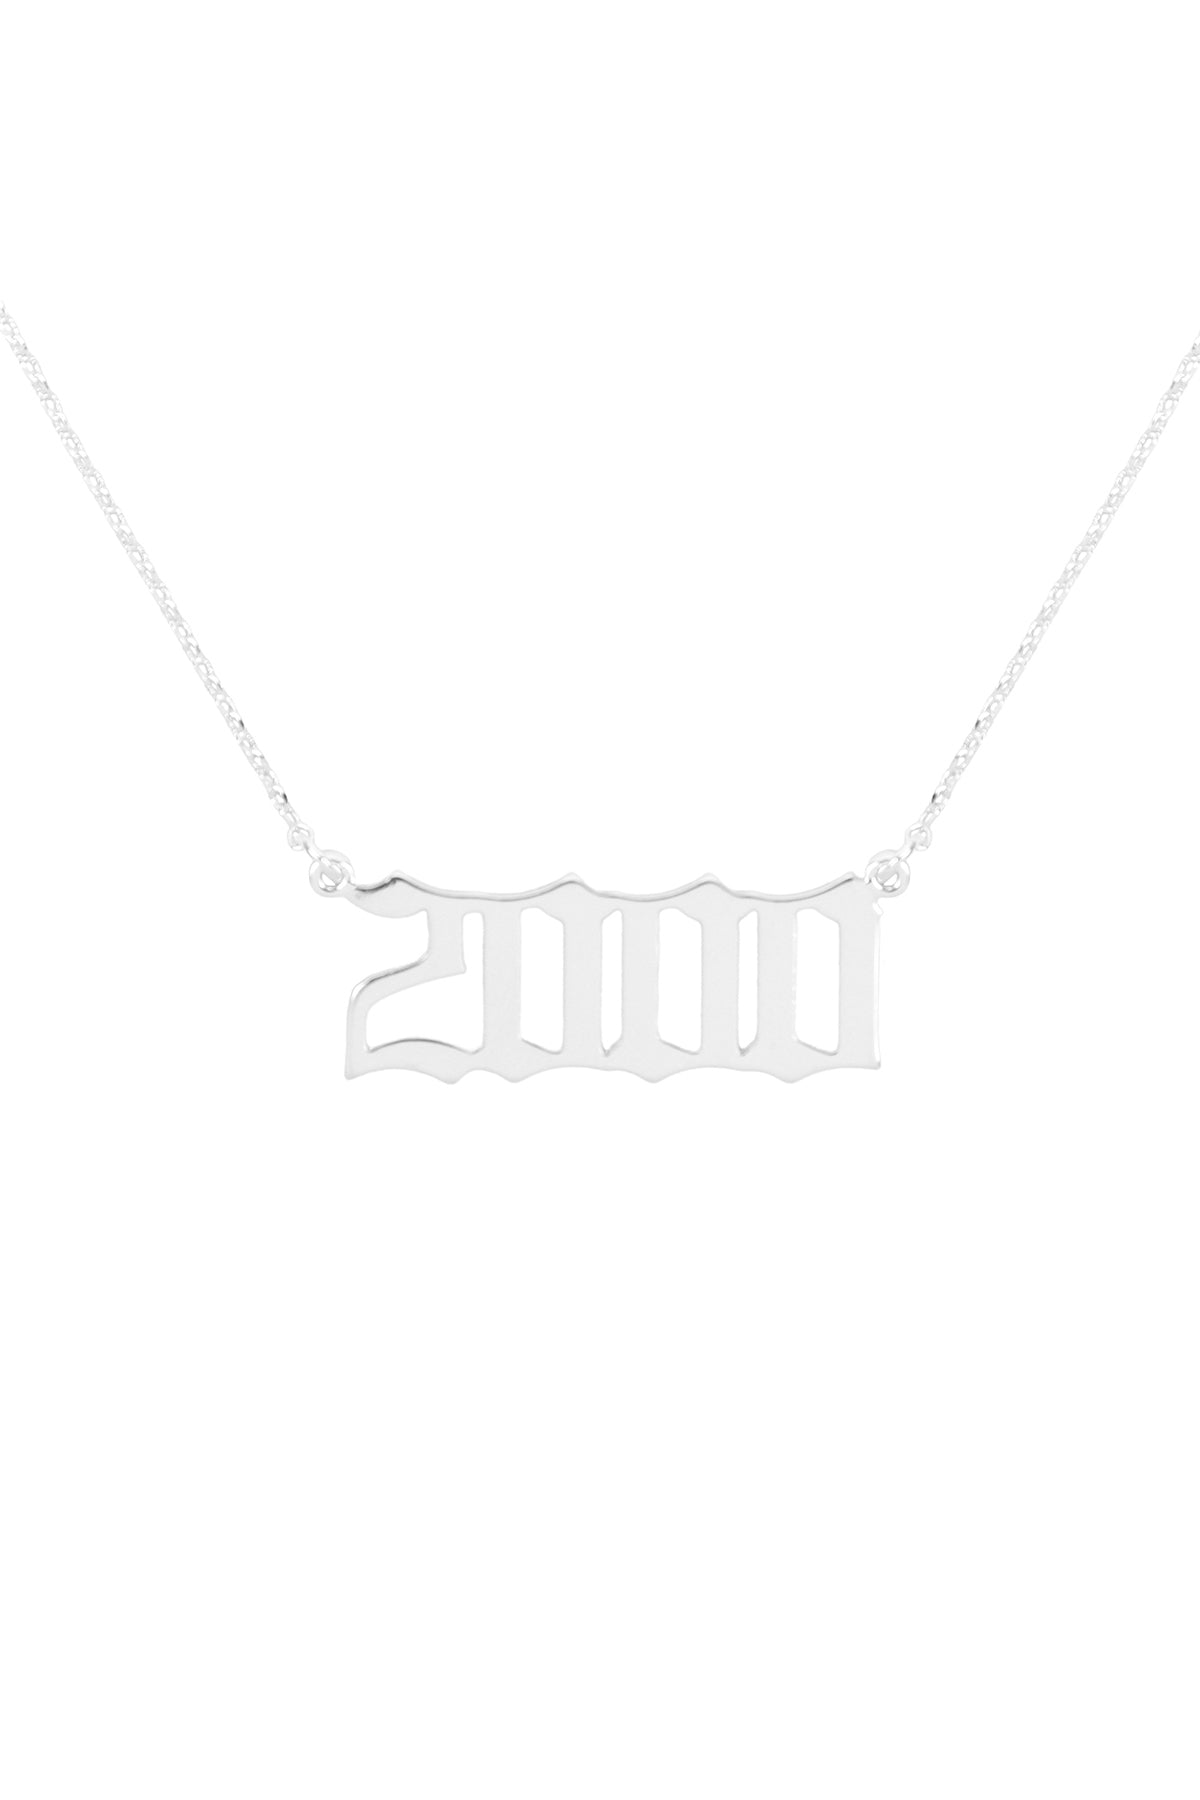 "2000" BIRTH YEAR PERSONALIZED NECKLACE